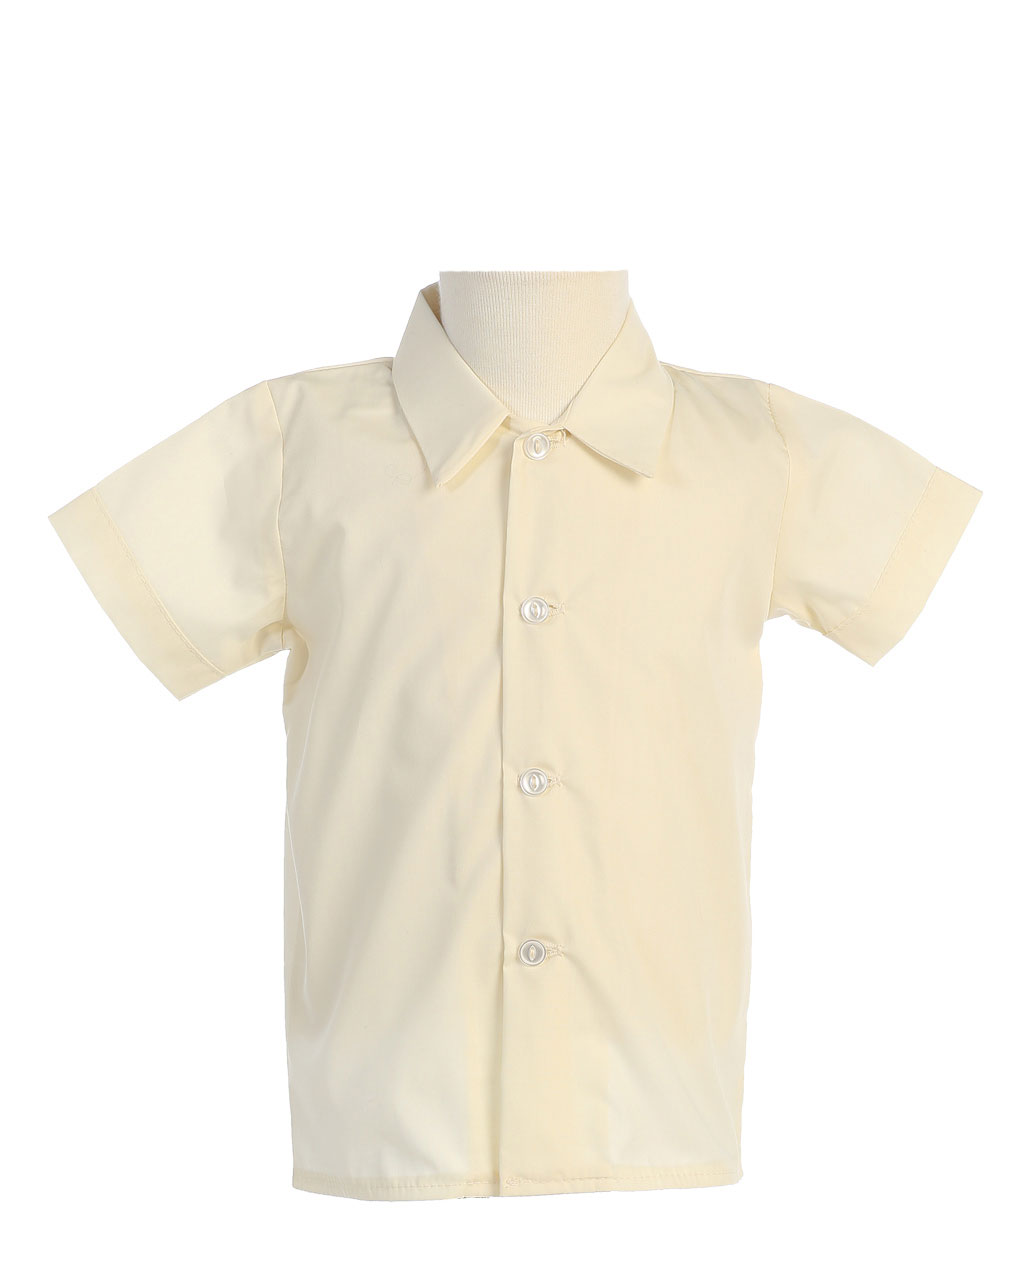 Boys Short Sleeved Simple Dress Shirt - Available in Ivory 4T